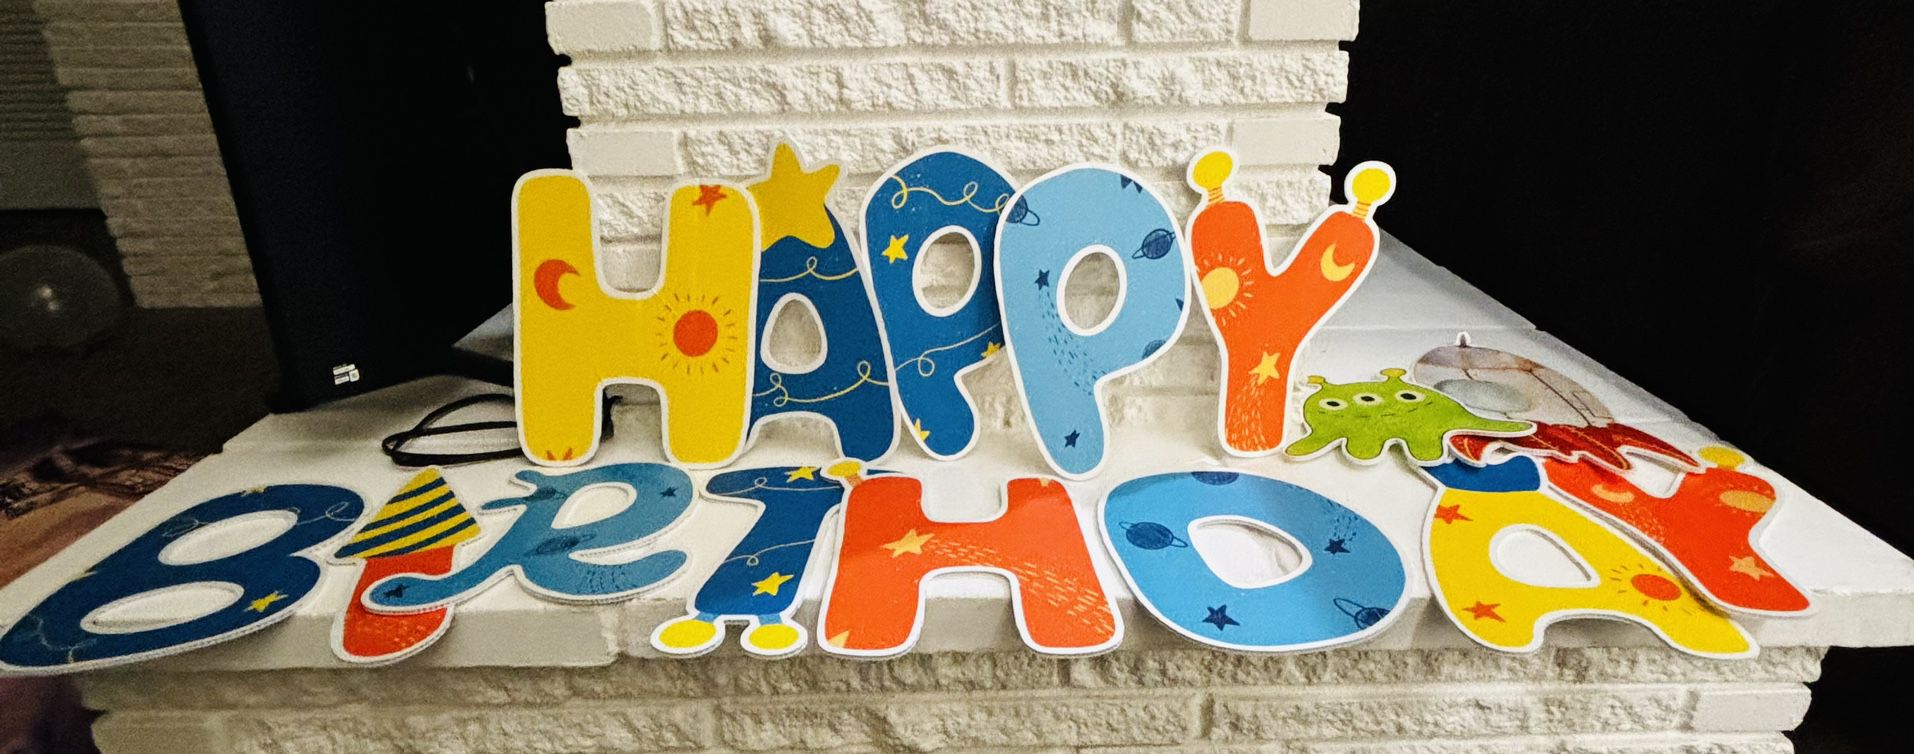 LARGE FOAM LETTERS Multi color Happy birthday 